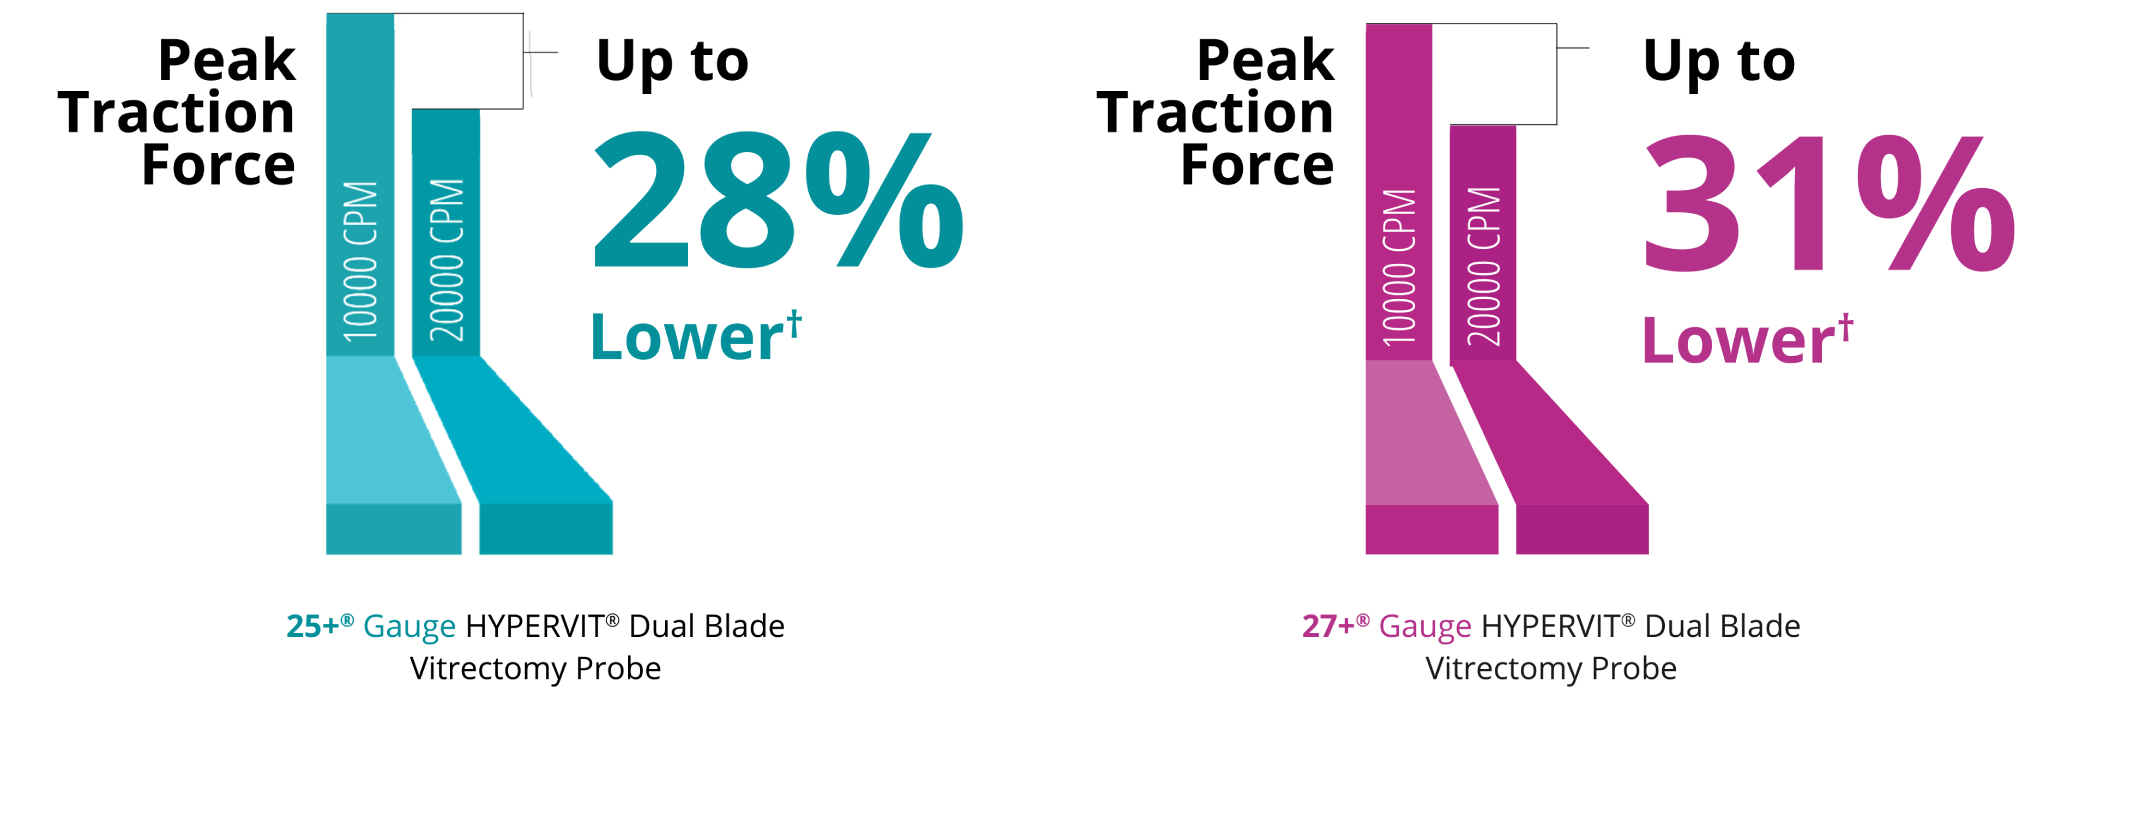 A bar graph comparing the peak traction force of the 10K and 20K 25+ Gauge Hypervit probe. The 20K probe in Core Vitrectomy mode has 28% lower peak traction force.  A bar graph comparing the peak traction force of the 10K and 20K 27+ Gauge Hypervit probe. The 20K probe in Core Vitrectomy mode has 31% lower peak traction force.